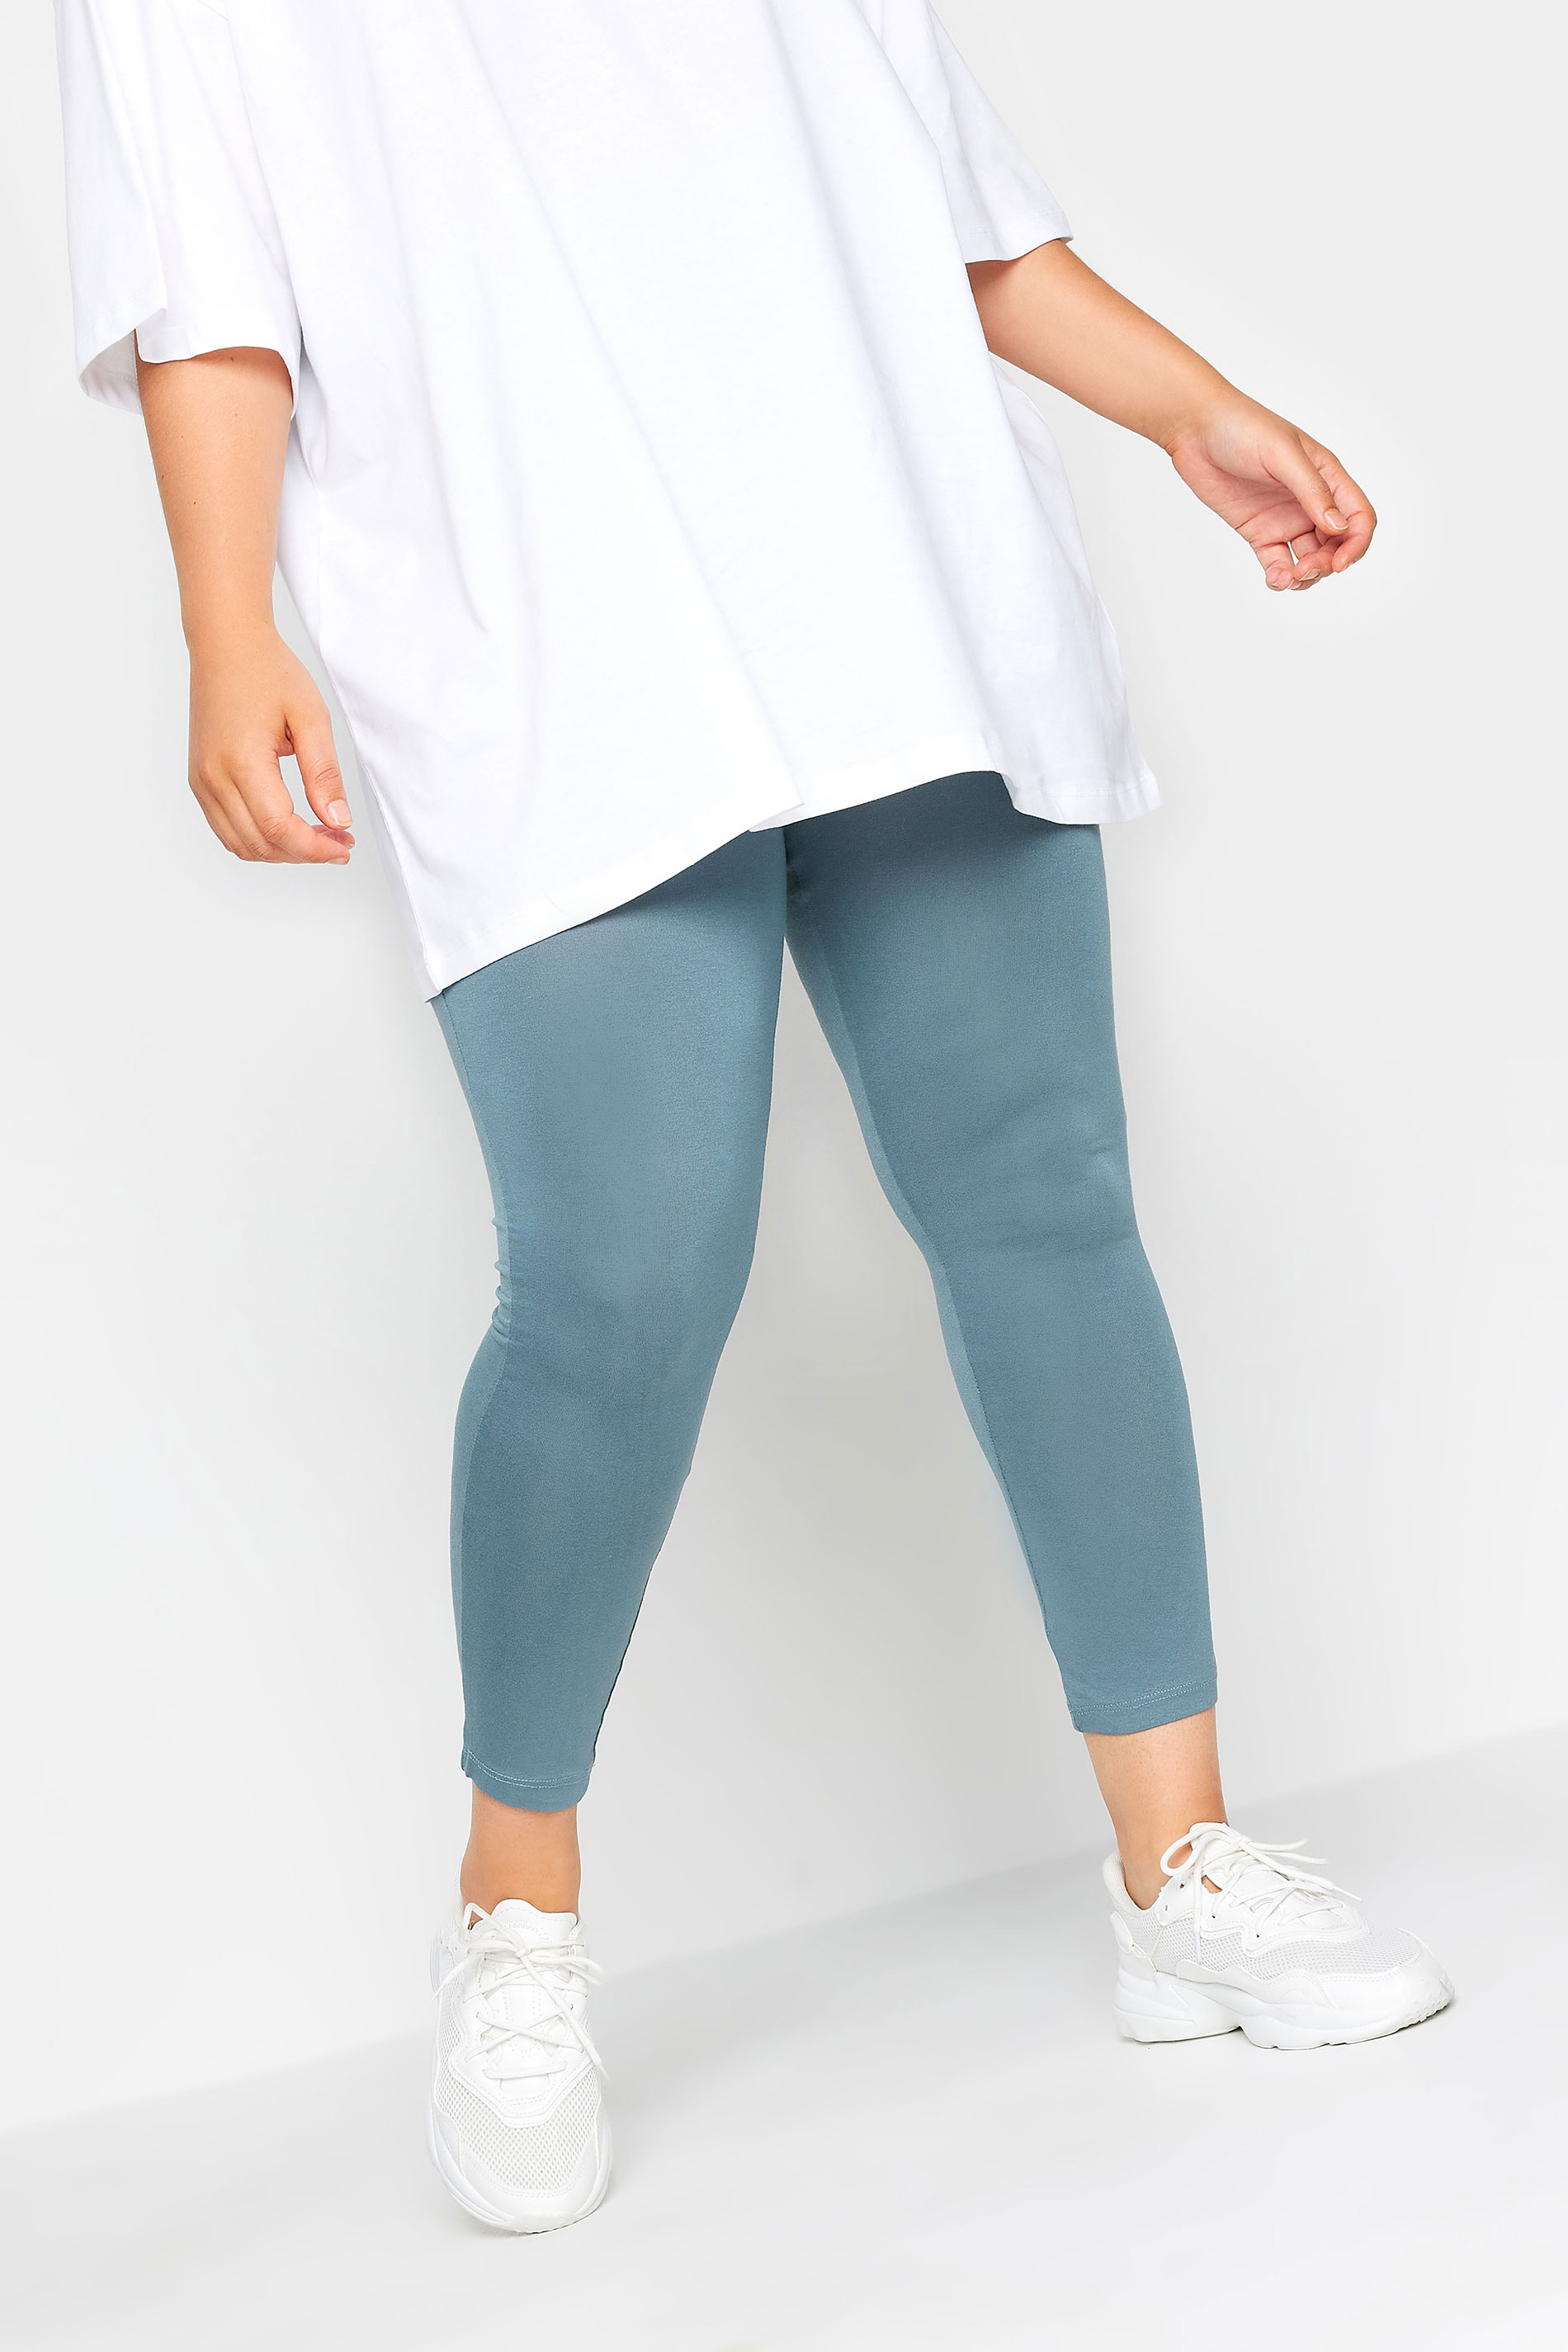 YOURS Plus Size Grey Stretch Leggings | Yours Clothing 1